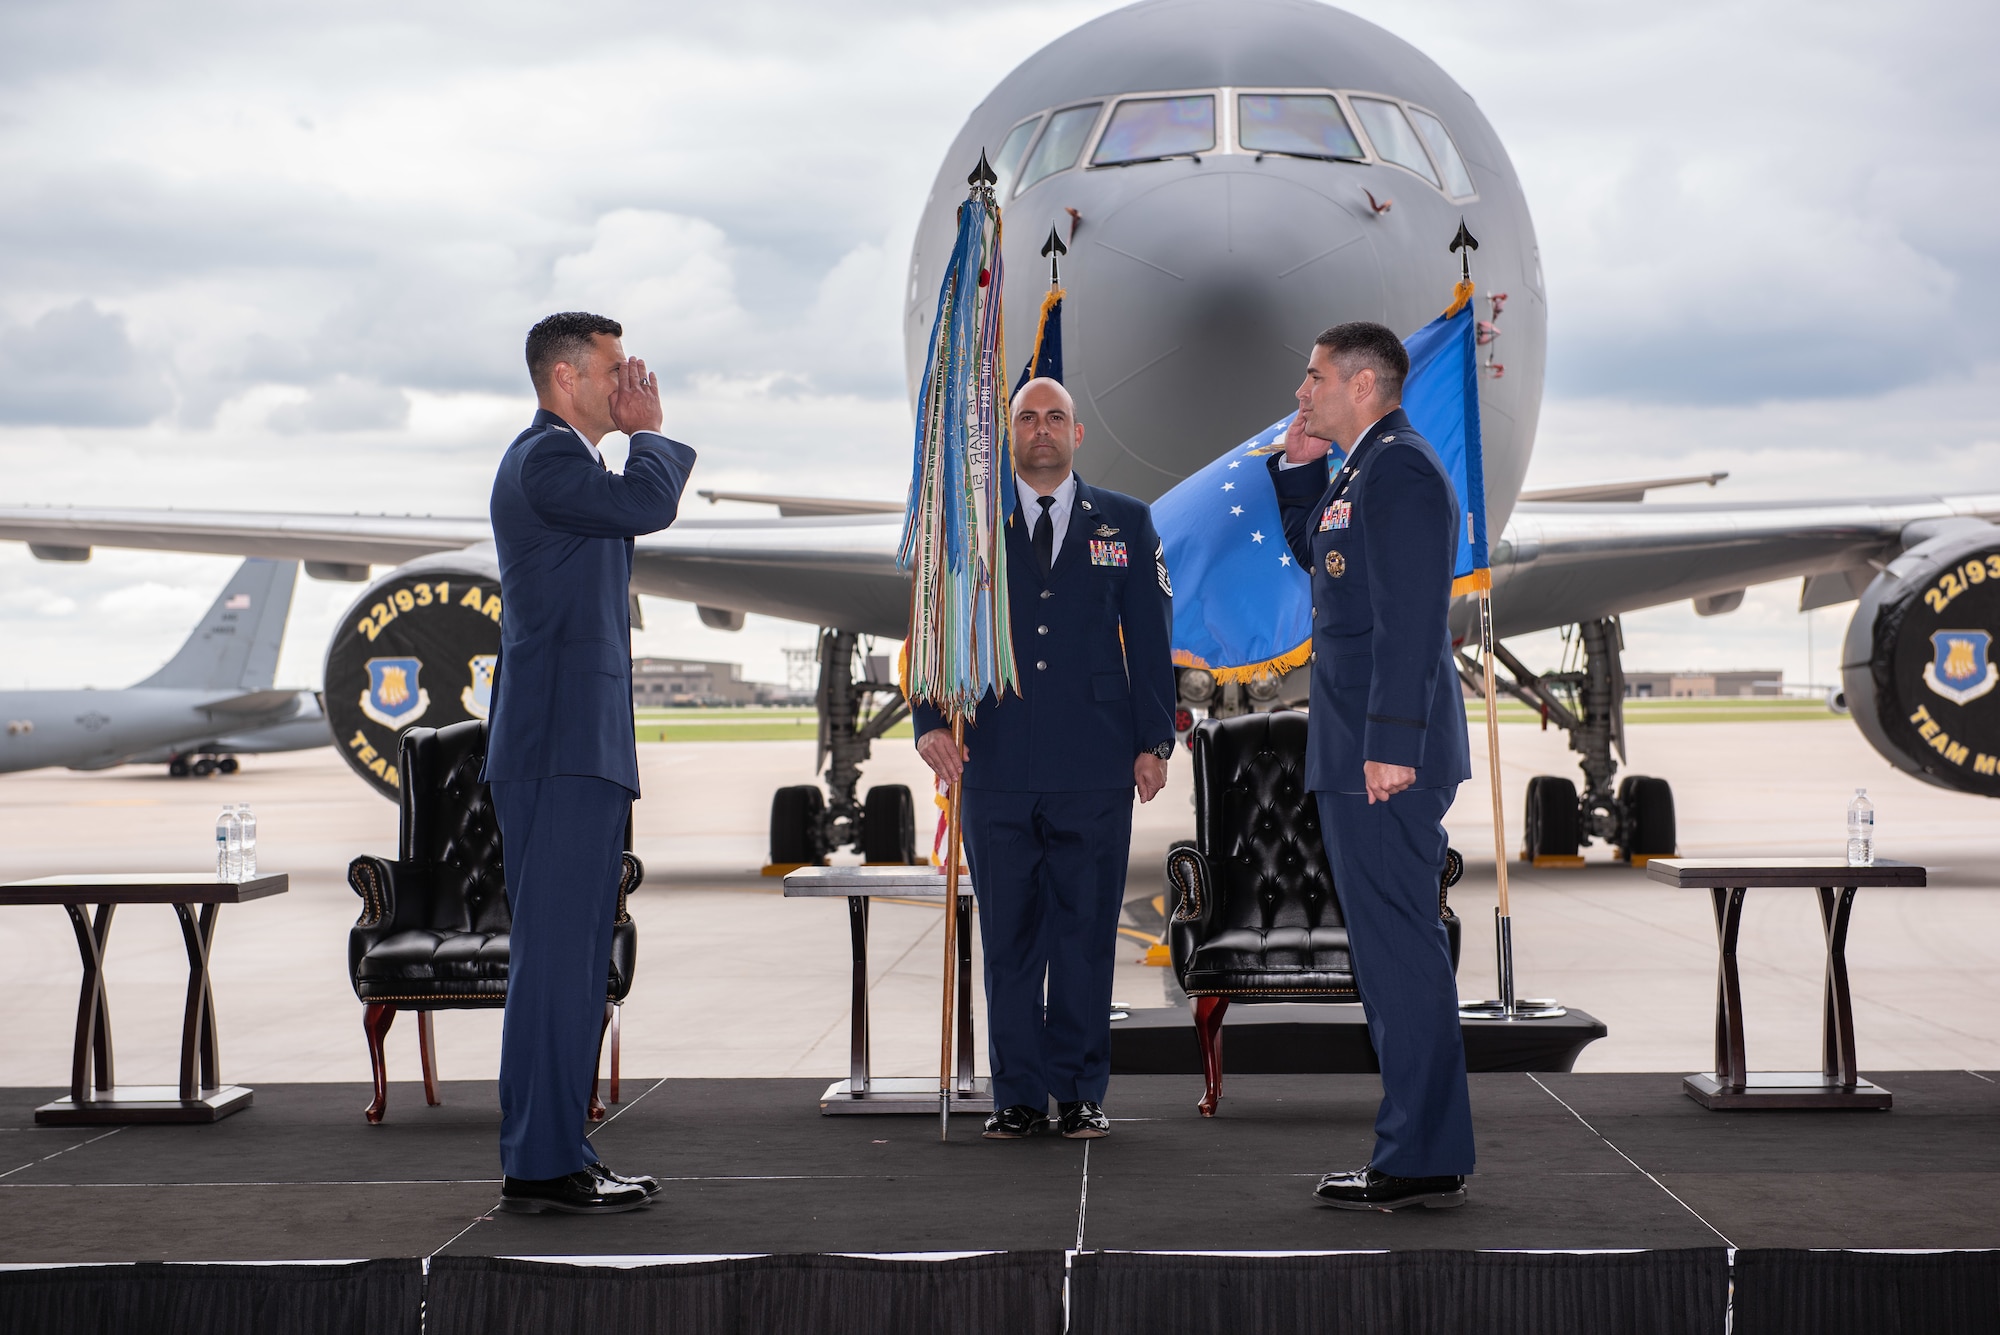 Lt. Col. Joshua Moores, right, accepts command of the 344th Air Refueling Squadron during a change of command ceremony May 27, 2020, at McConnell Air Force Base, Kansas. Under Moores’ command, the 344th will continue developing as the KC-46A Pegasus becomes fully mission capable. (U.S. Air Force photo by Staff Sgt. Chris Thornbury)